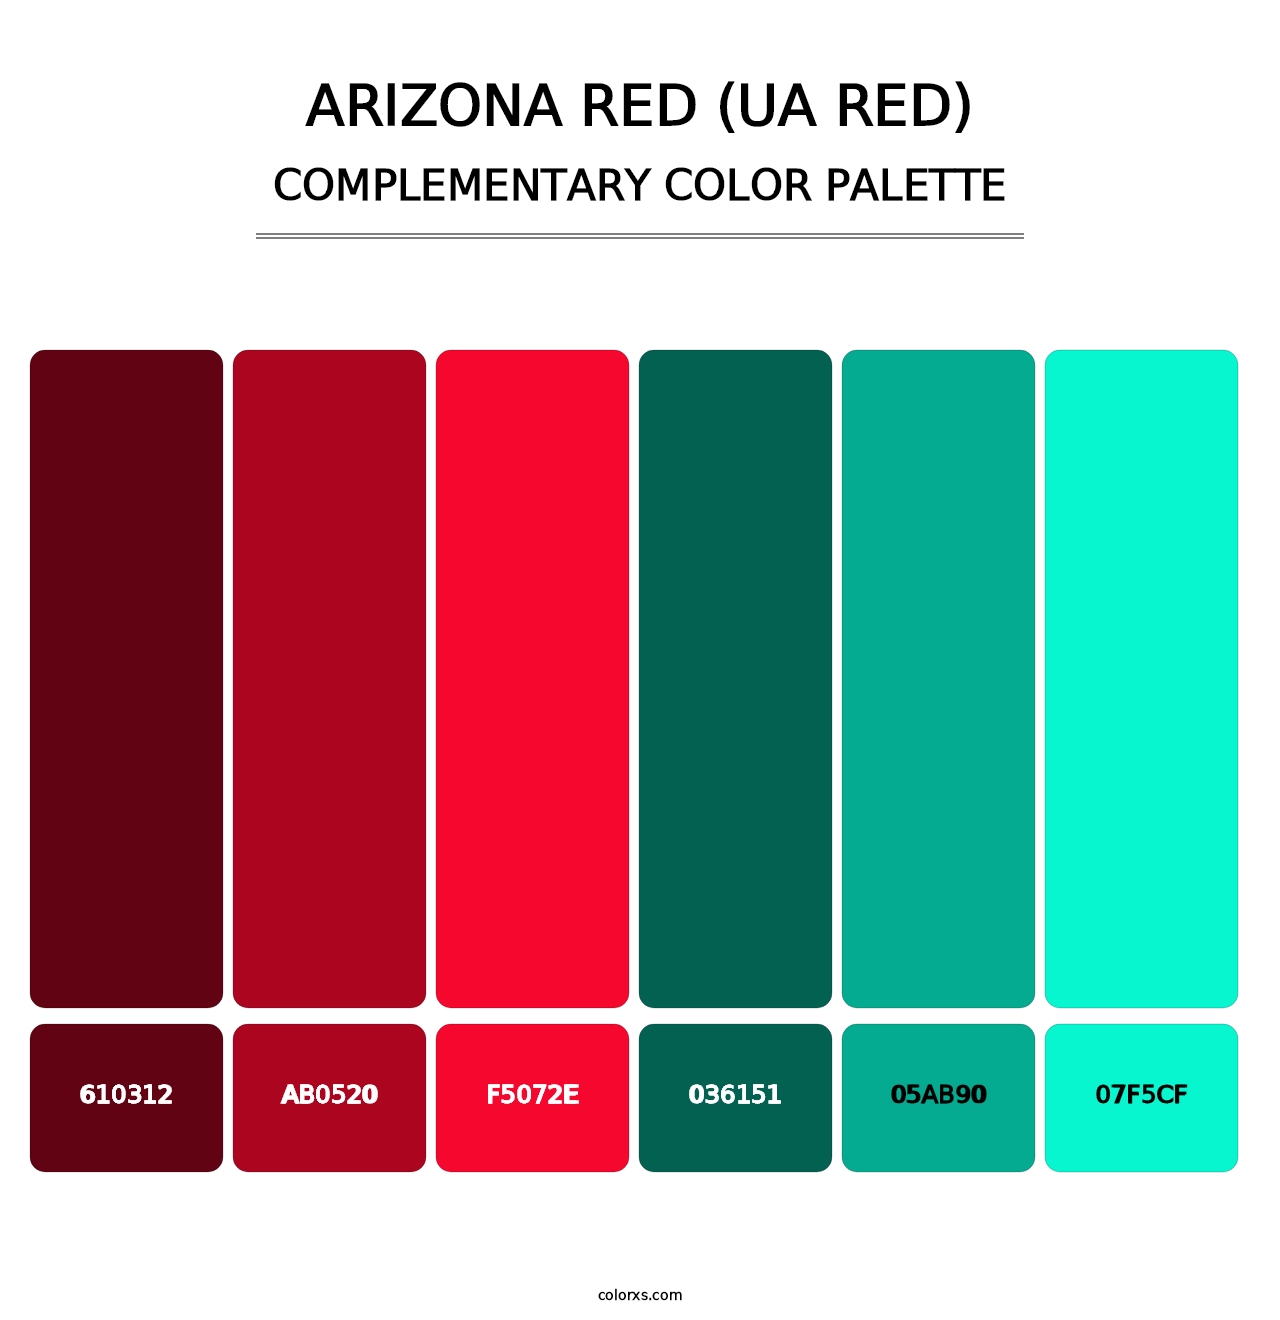 Arizona Red (UA Red) - Complementary Color Palette